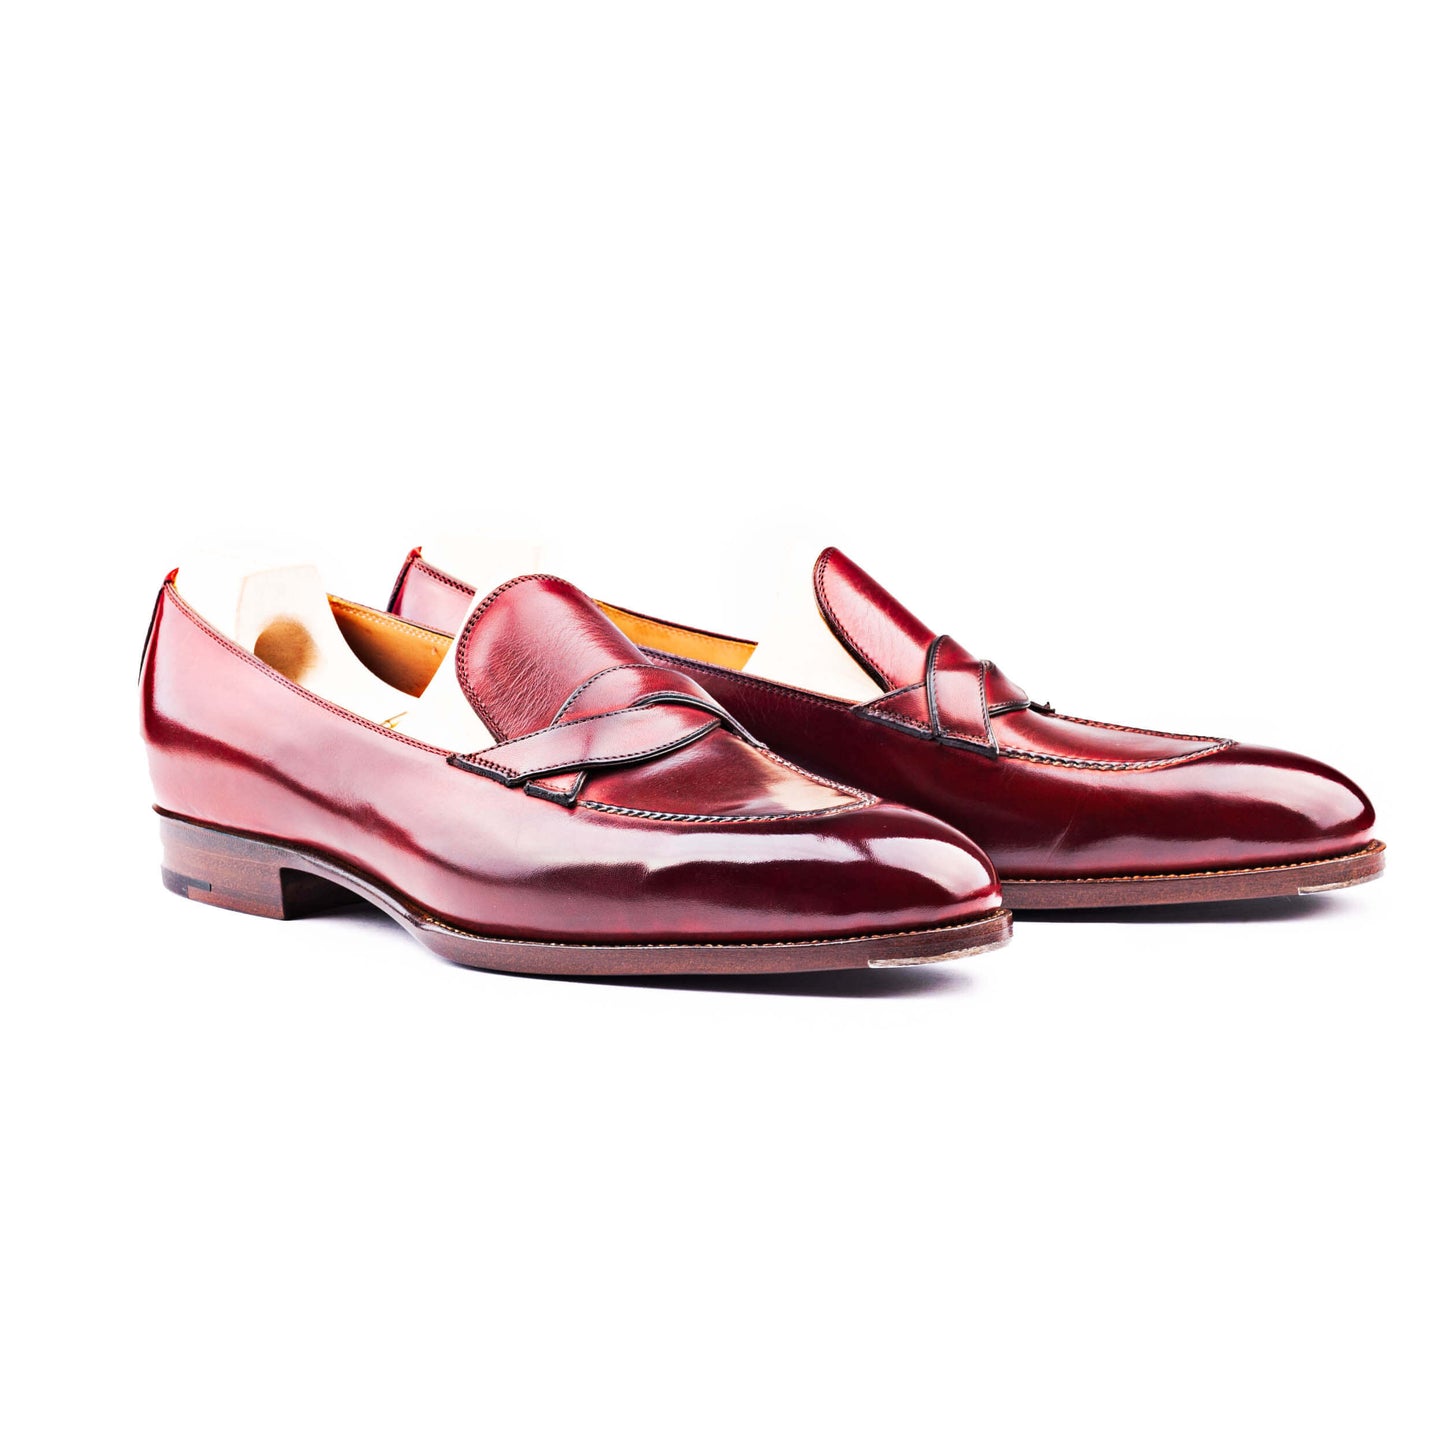 The Entwined Loafer in Burgundy Crust calf leather